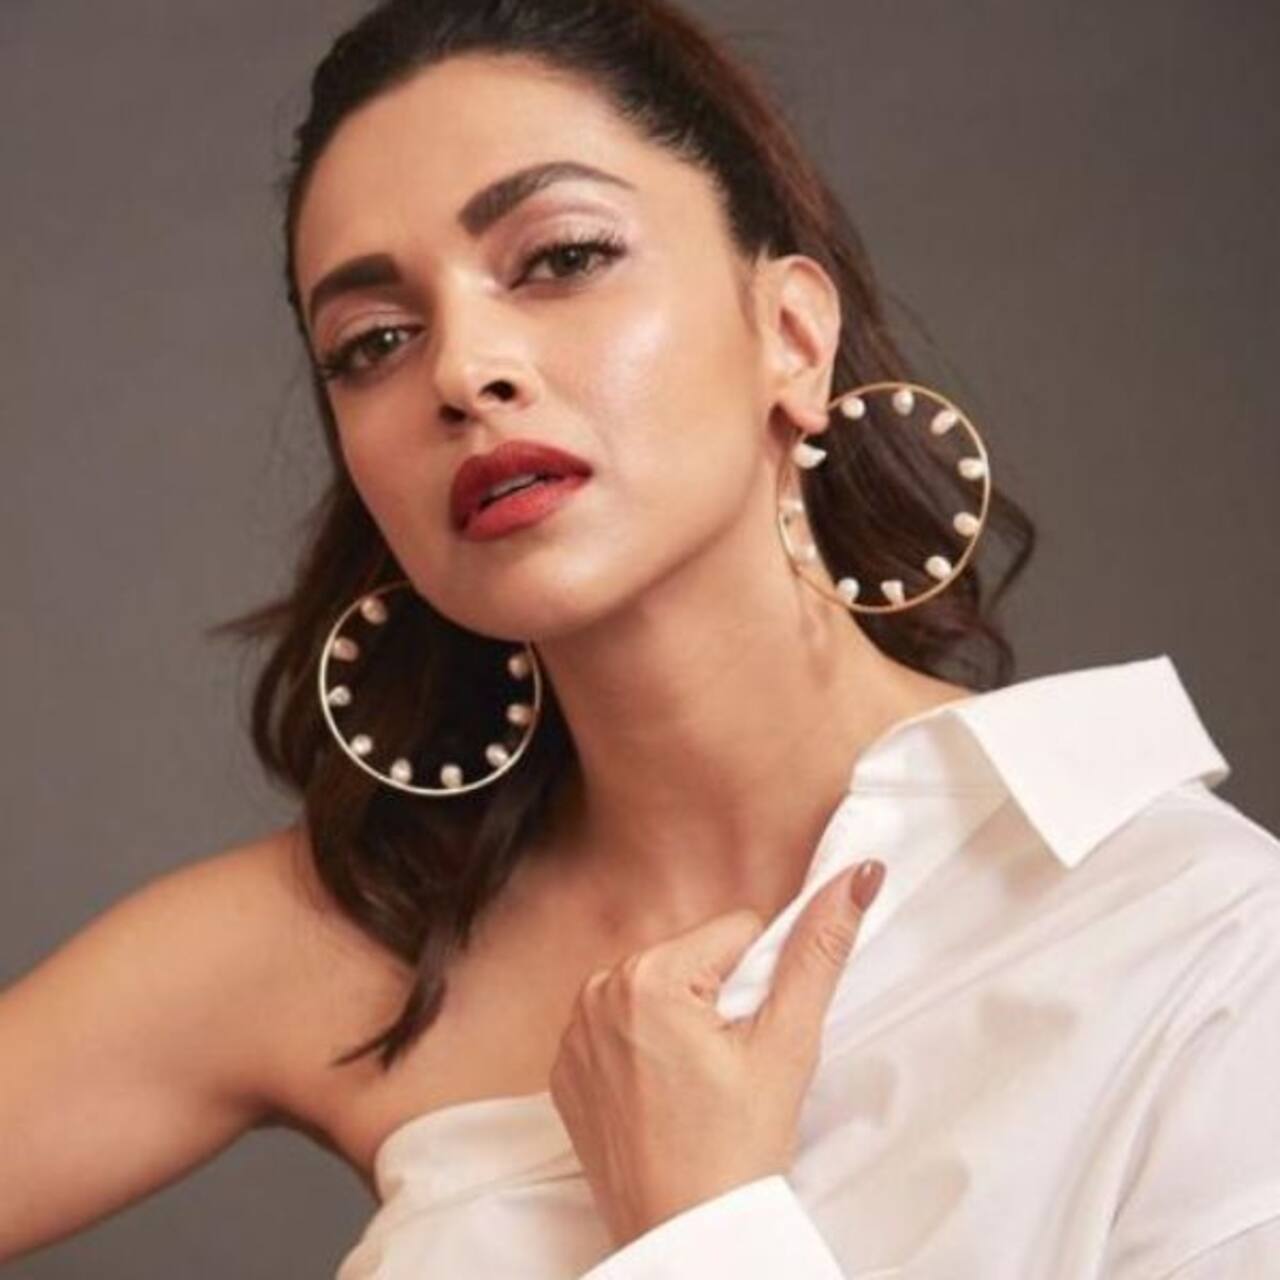 Deepika Padukone gives a fitting reply to a journalist who inquires about her pregnancy rumours